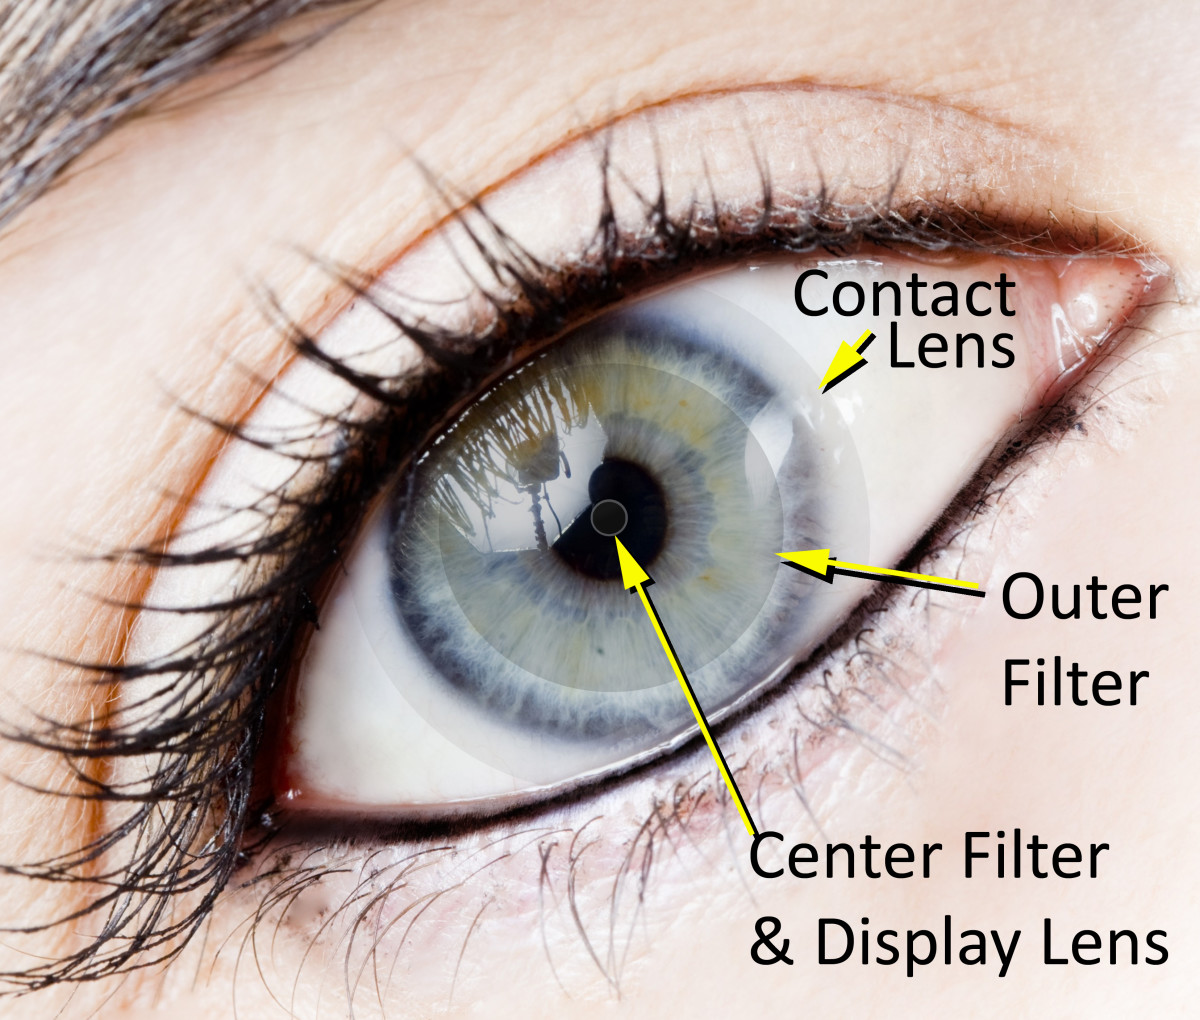 What are some natural factors that can cause eye pressure?